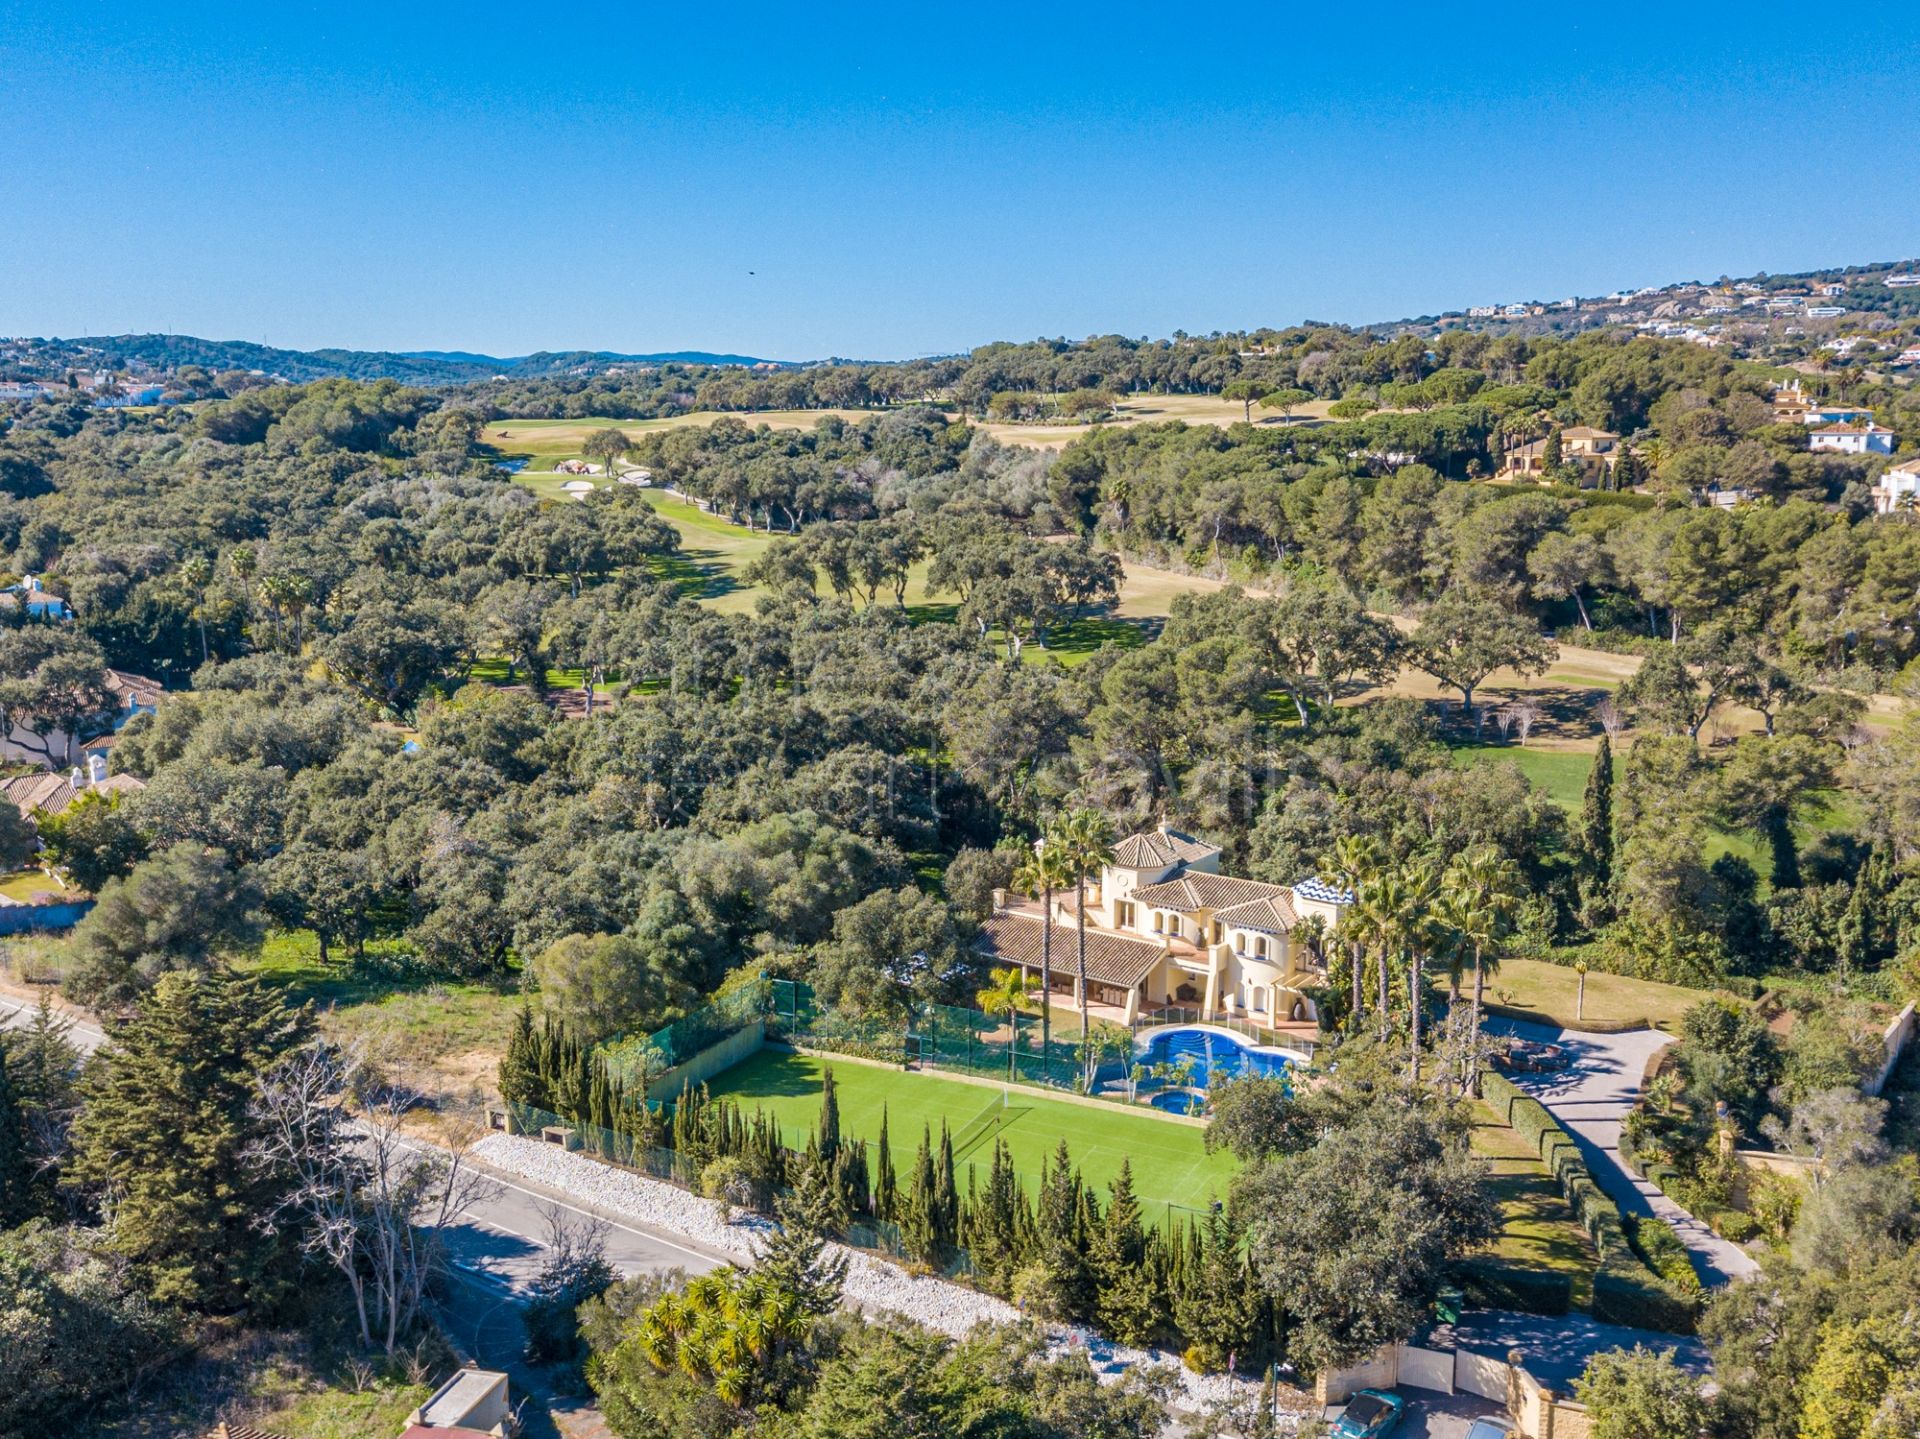 Spacious villa on over 4400m2 plot with tennis court frontline to Real Valderrama golf course